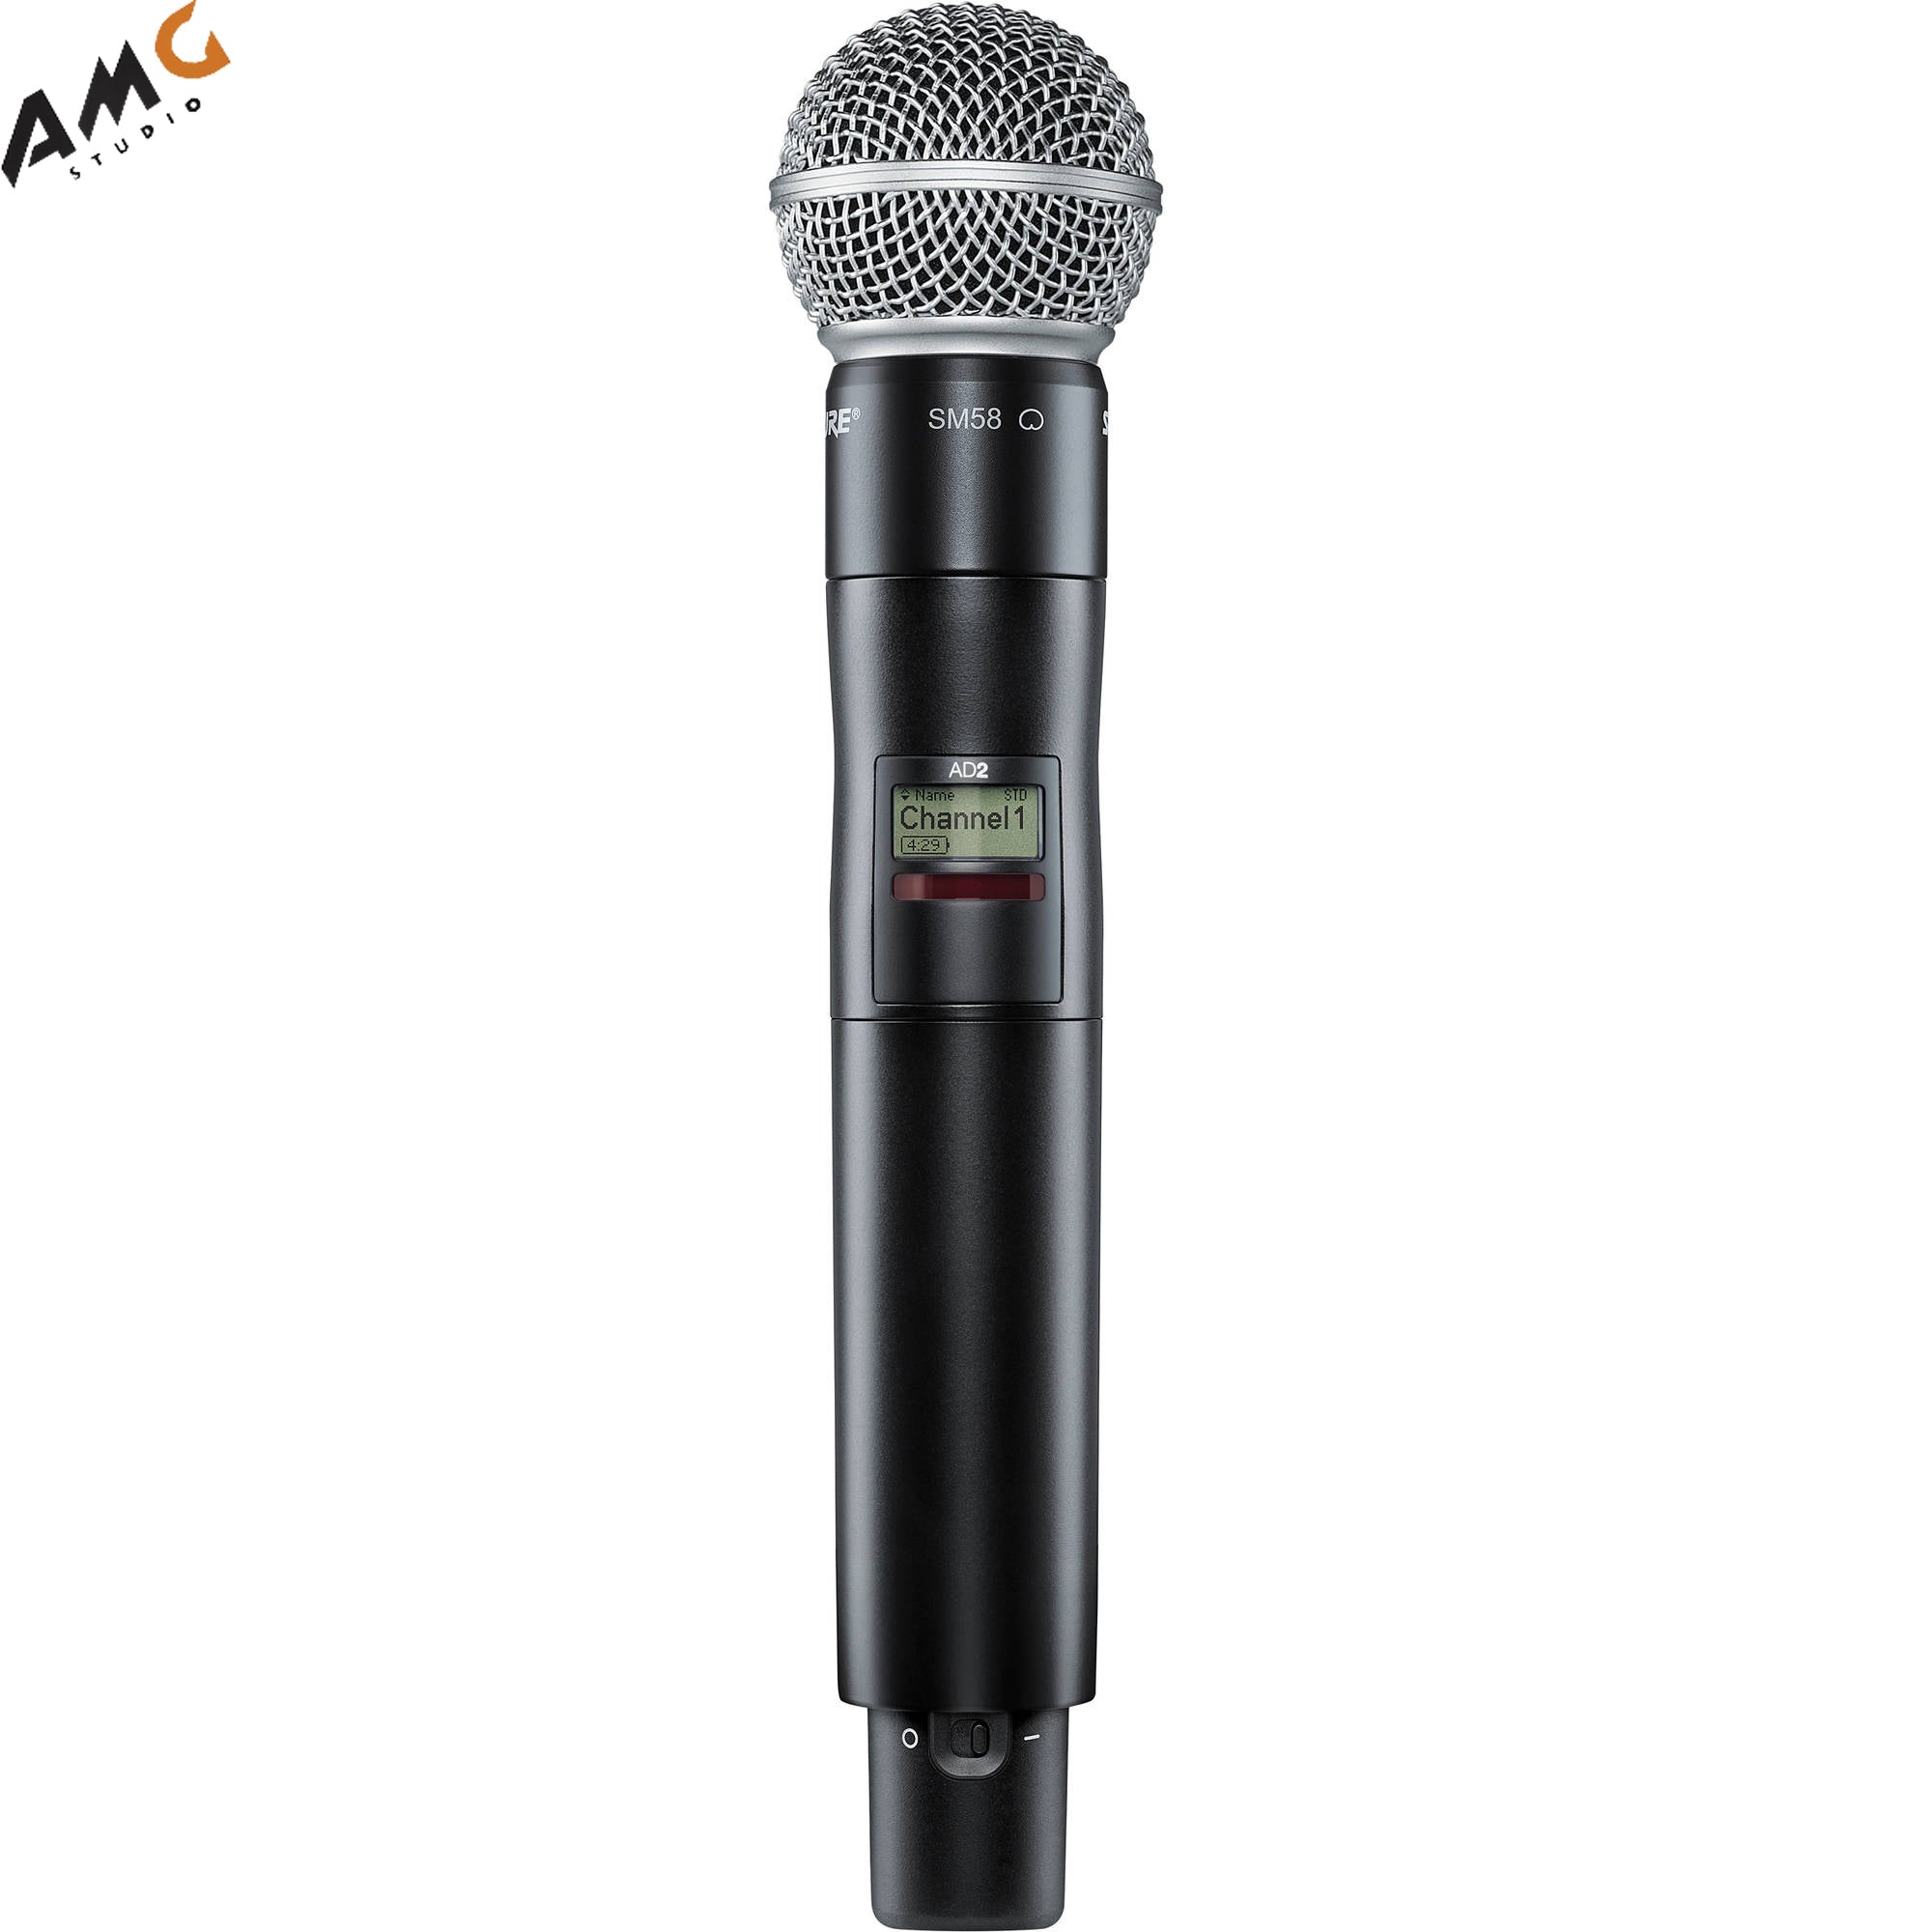 Shure AD2/SM58 Digital Handheld Wireless Microphone Transmitter with SM58 Capsule (G57: 470 to 616 MHz) - Studio AMG